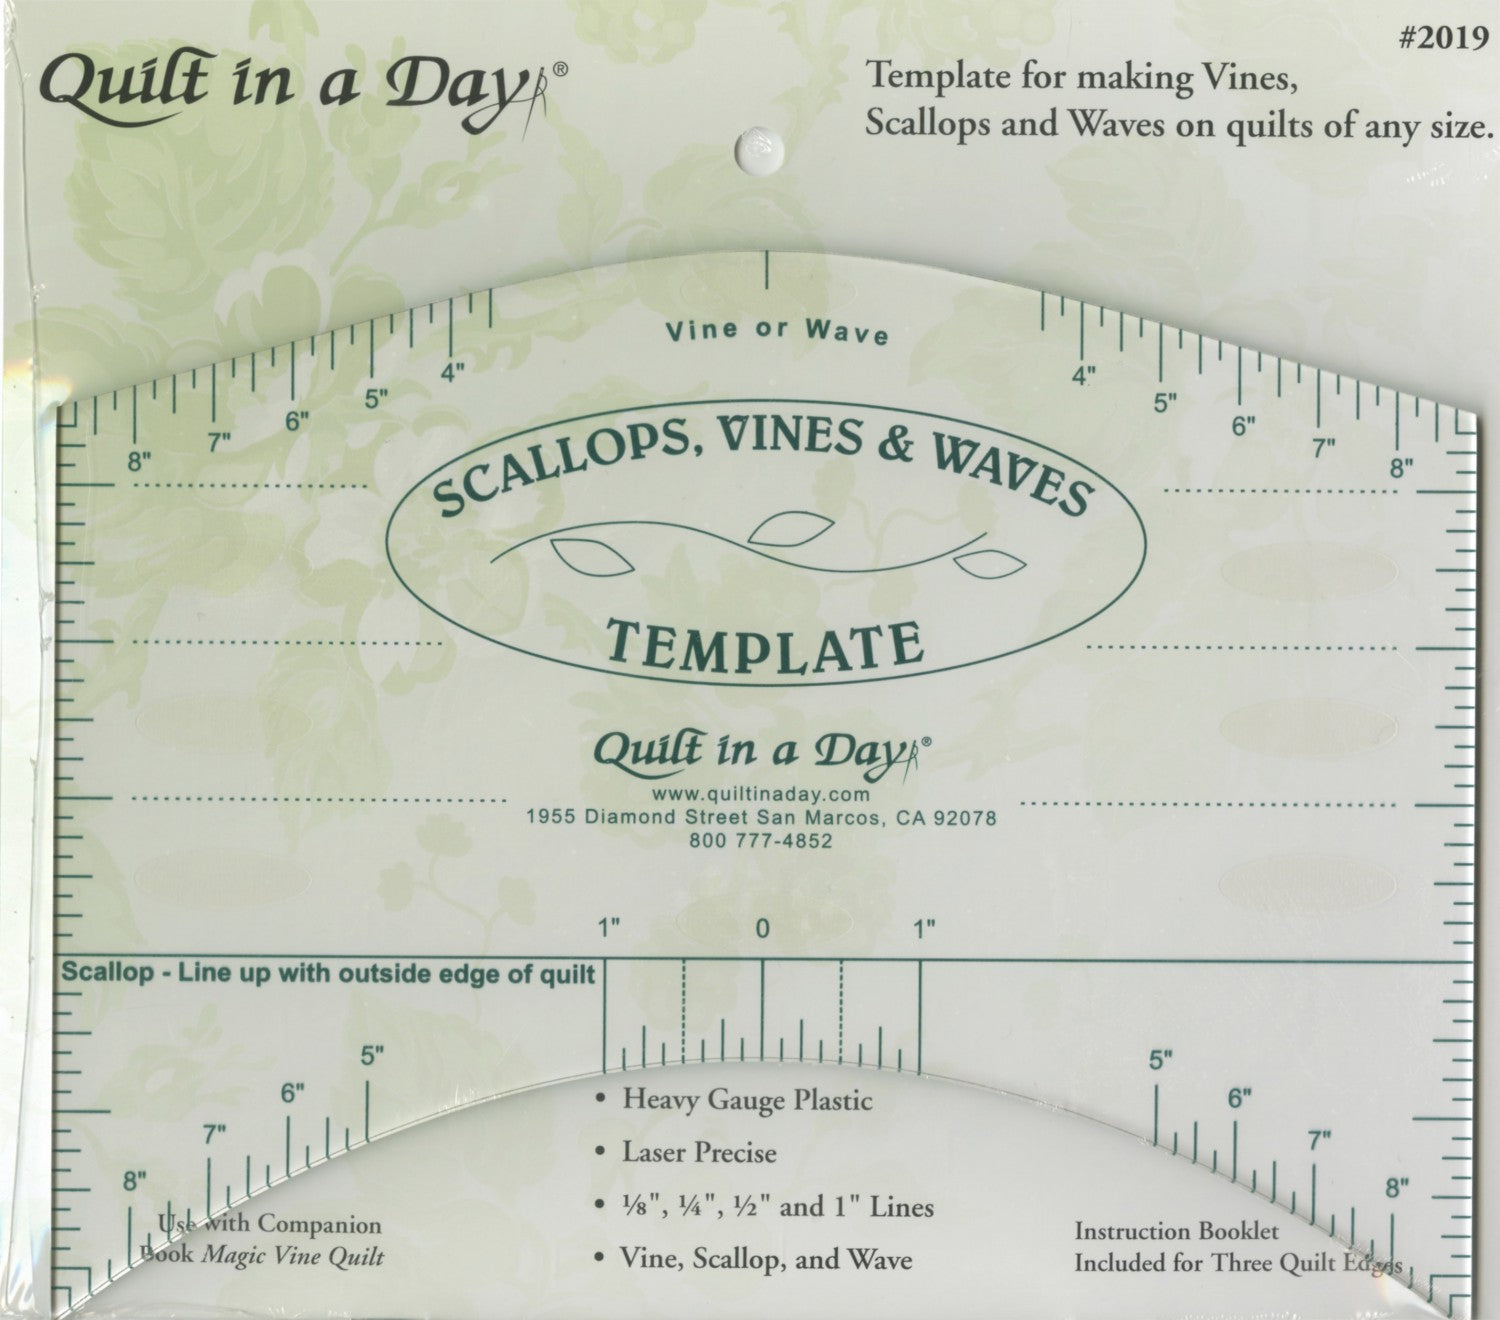 Scallops, Vines & Waves Template